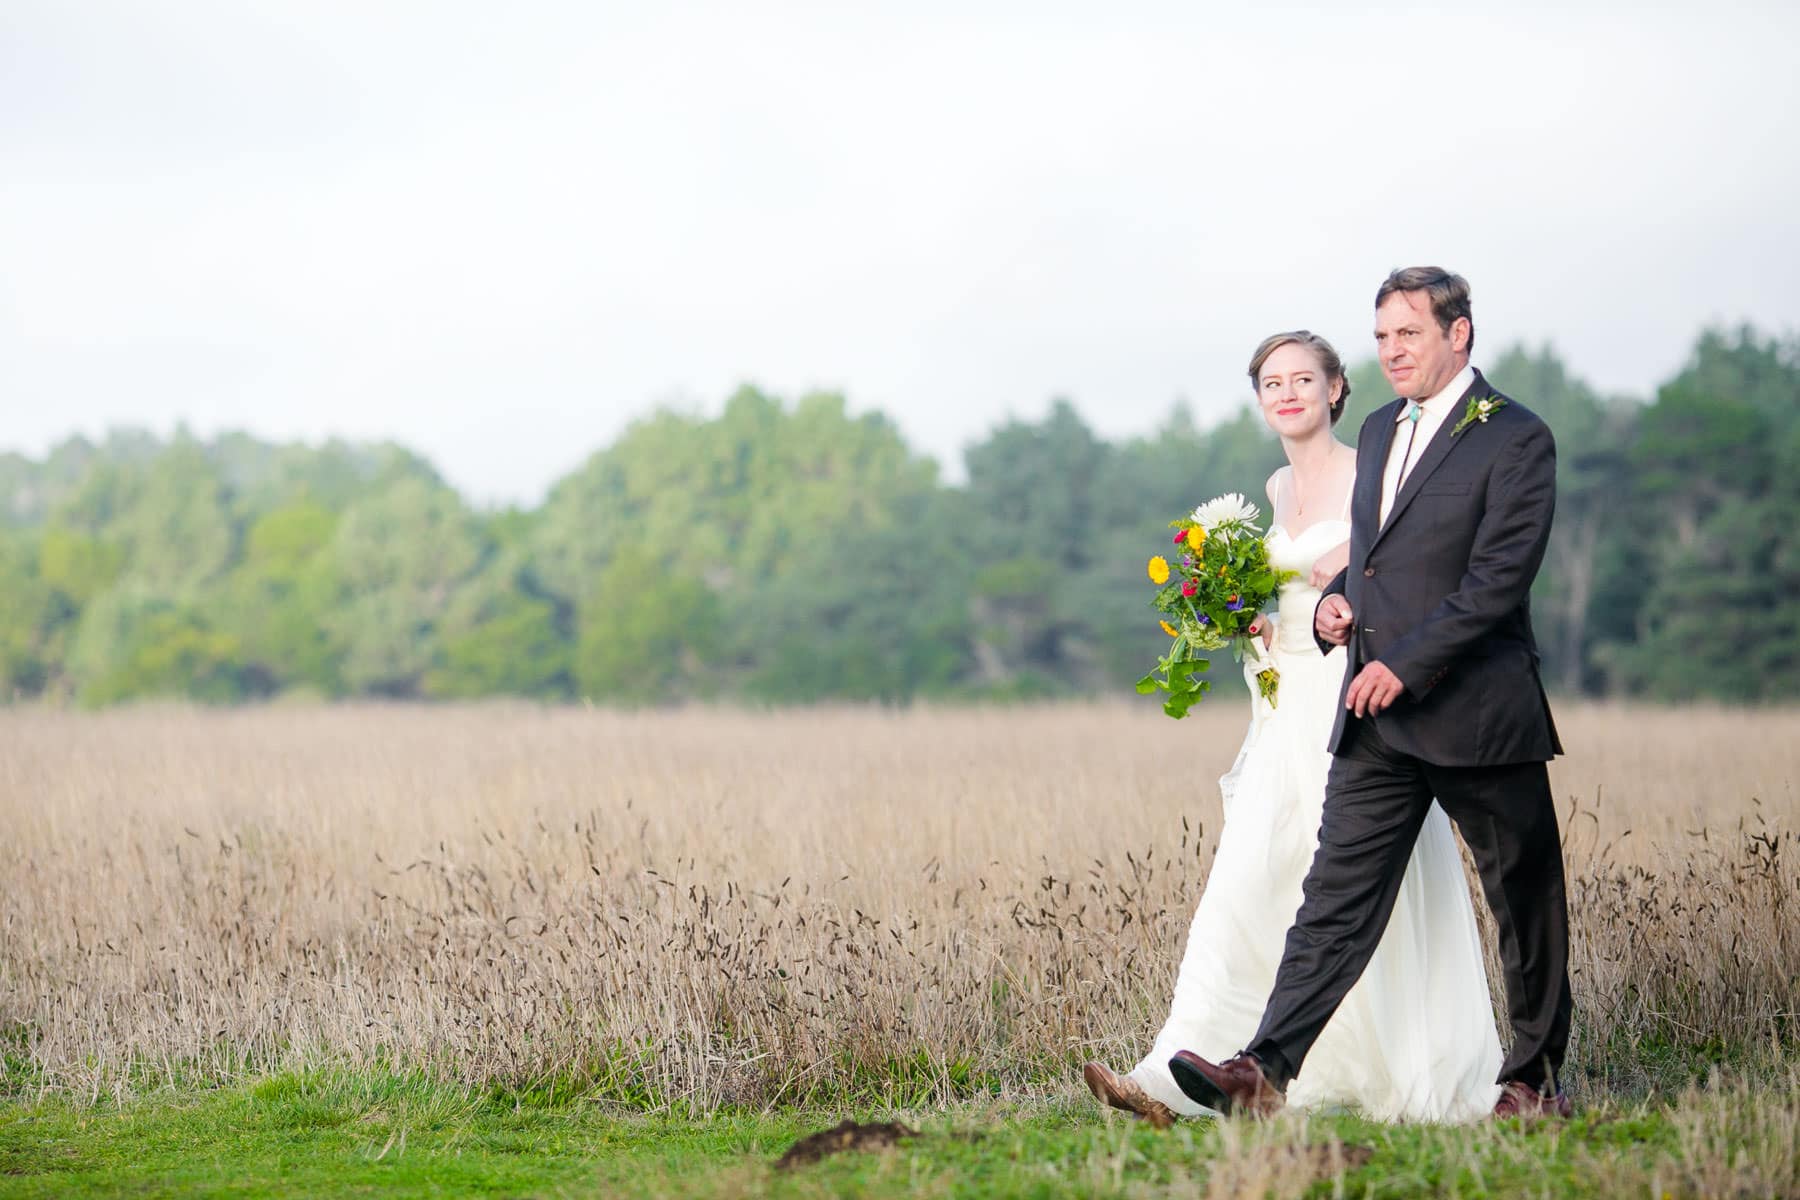 Bride and her father walking through a field